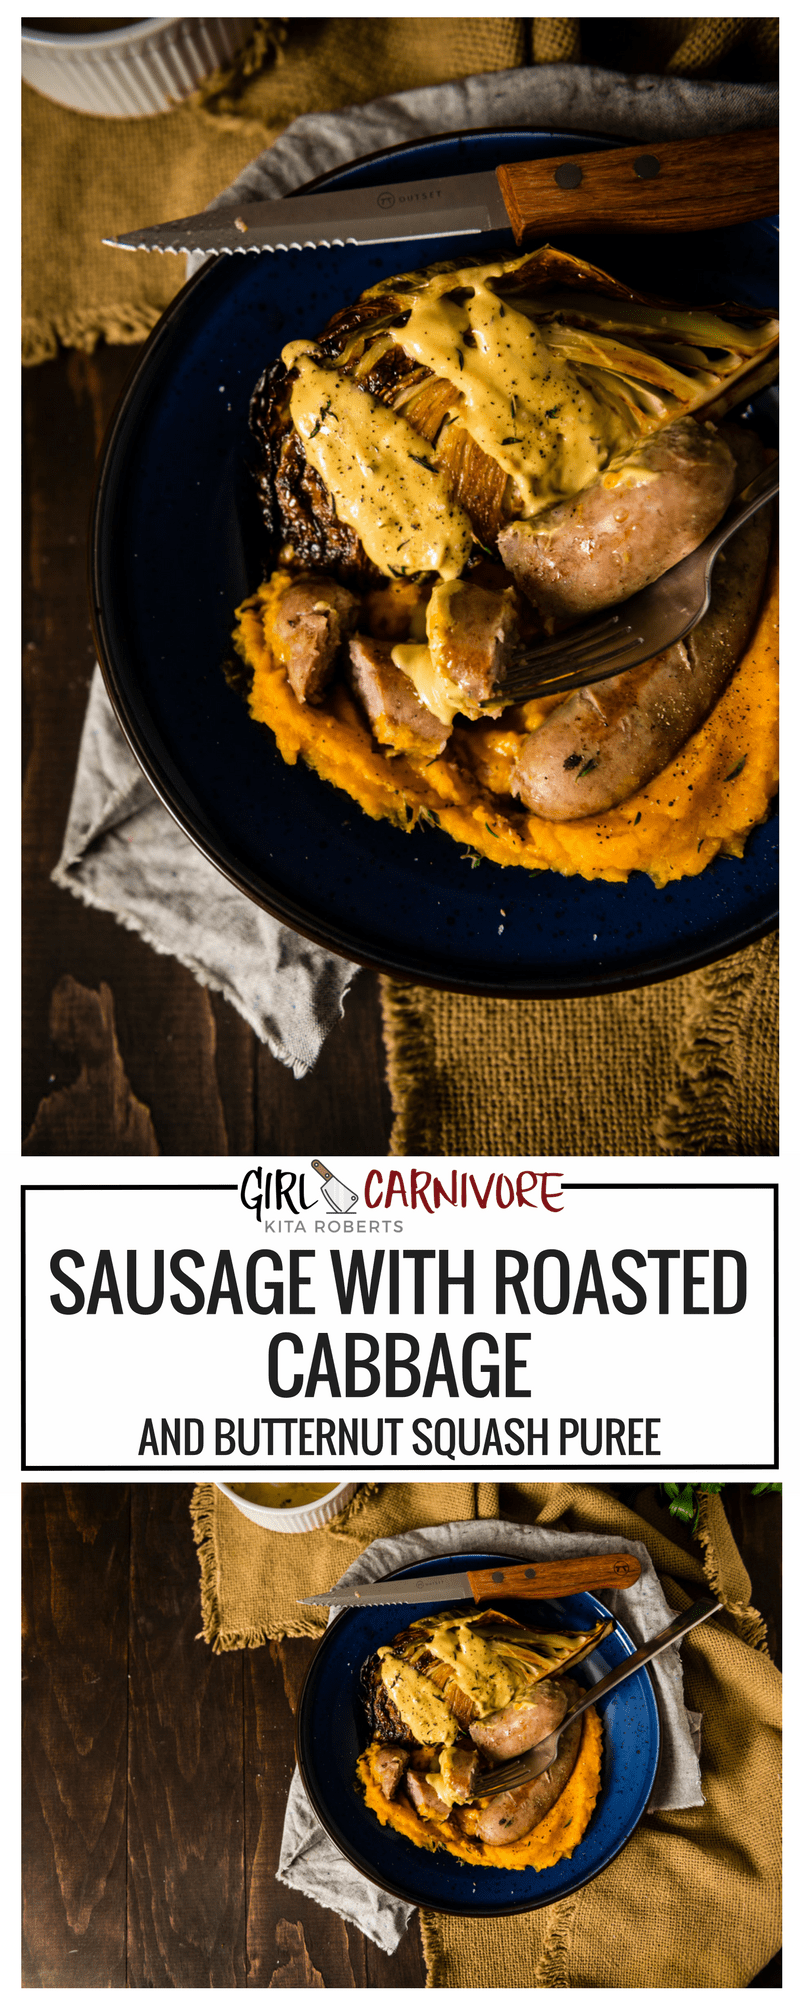 Whole 30 Approved Sausage with Roasted Cabbage and Butternut Squash Puree - Perfect comfort food! Recipe at GirlCarnivore.com